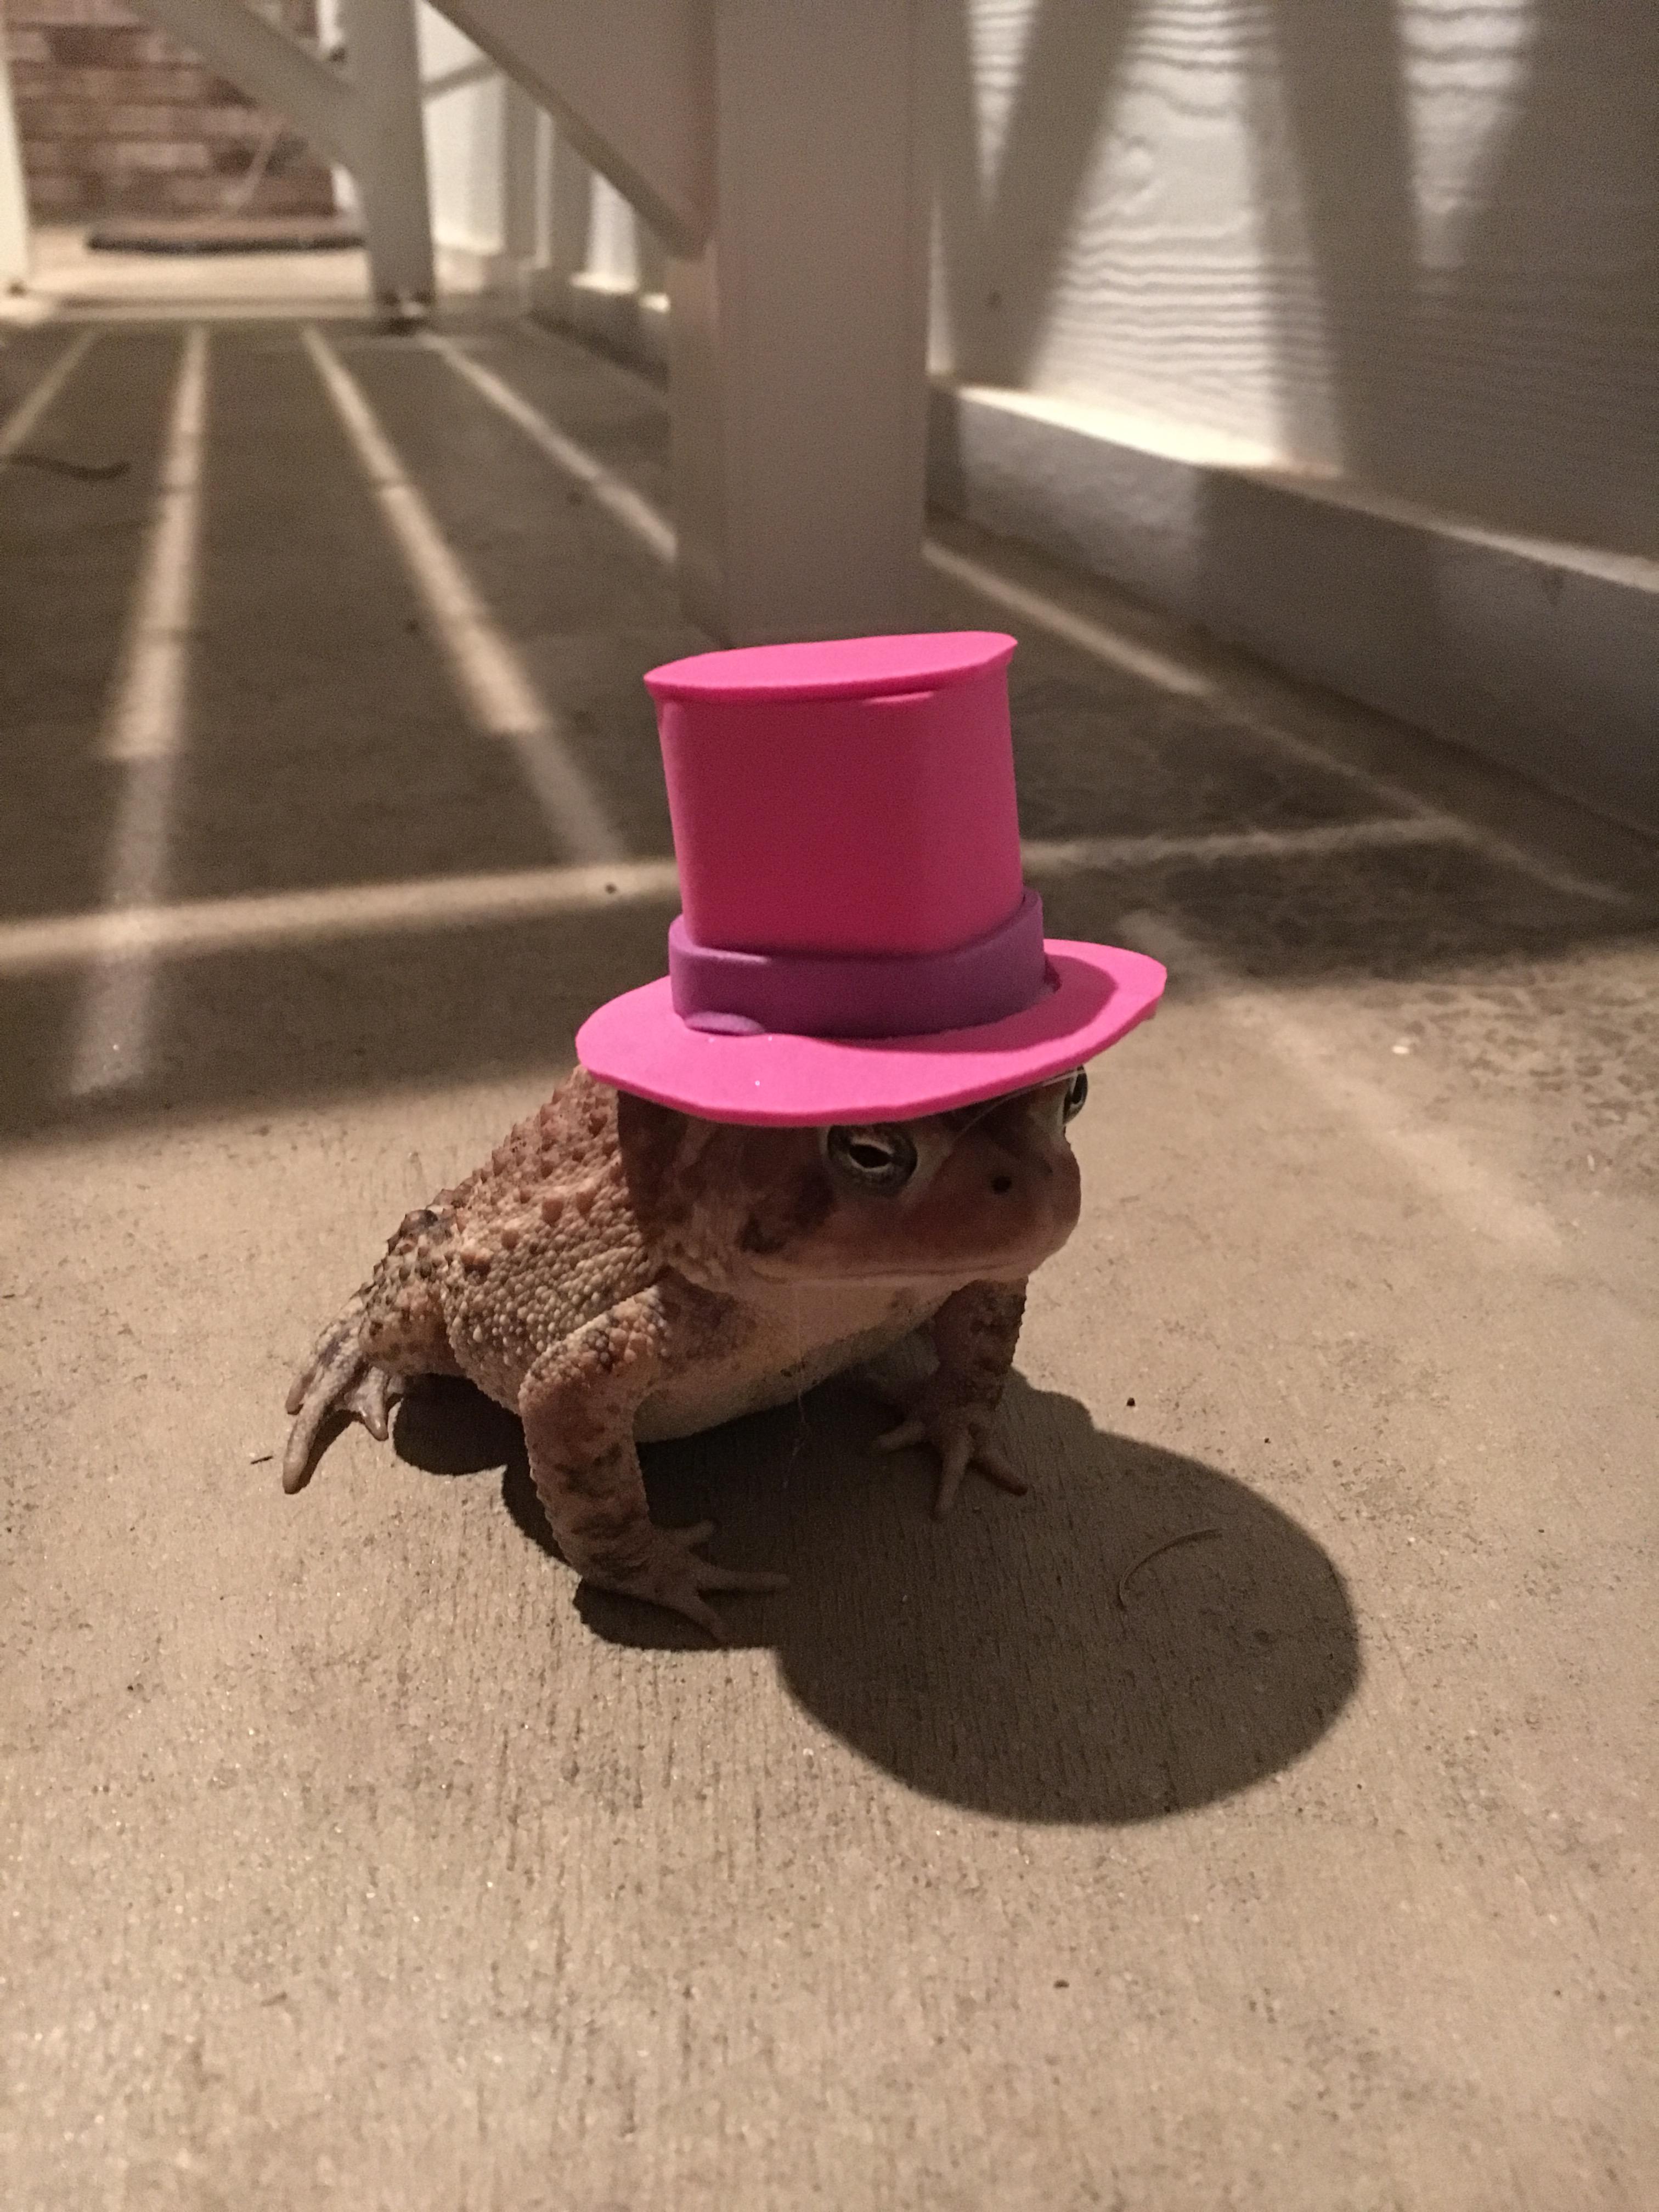 Man makes cute hats for toad that visits his porch 3